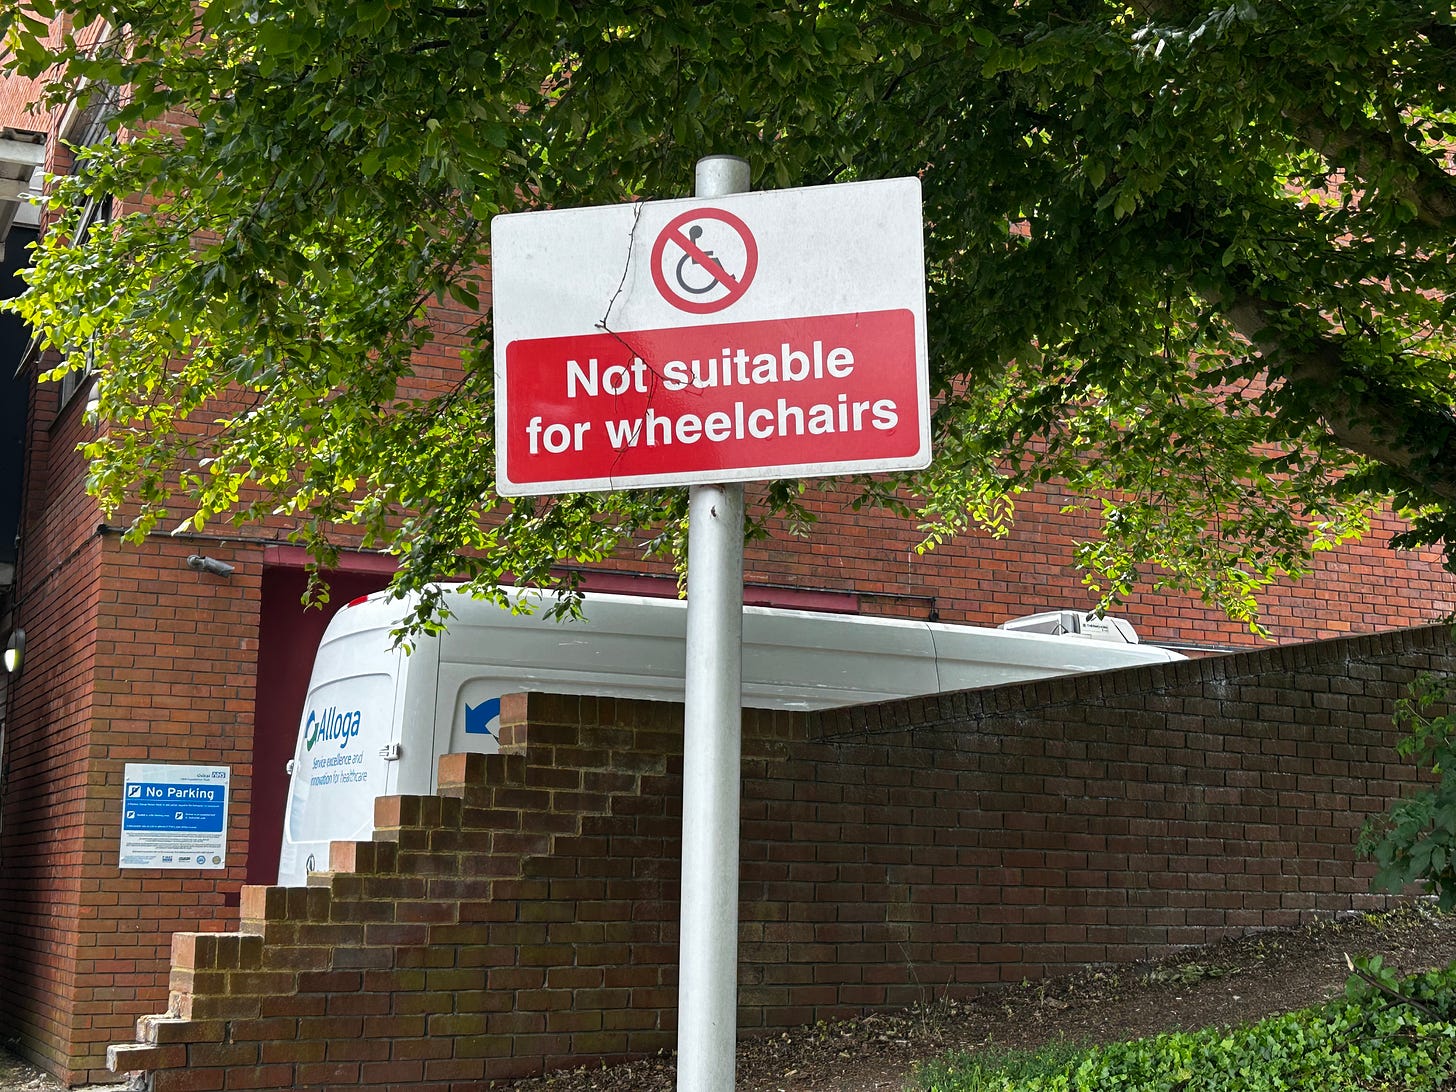 Sign with a crossed-out wheelchair symbol and the text "Not suitable for wheelchairs"